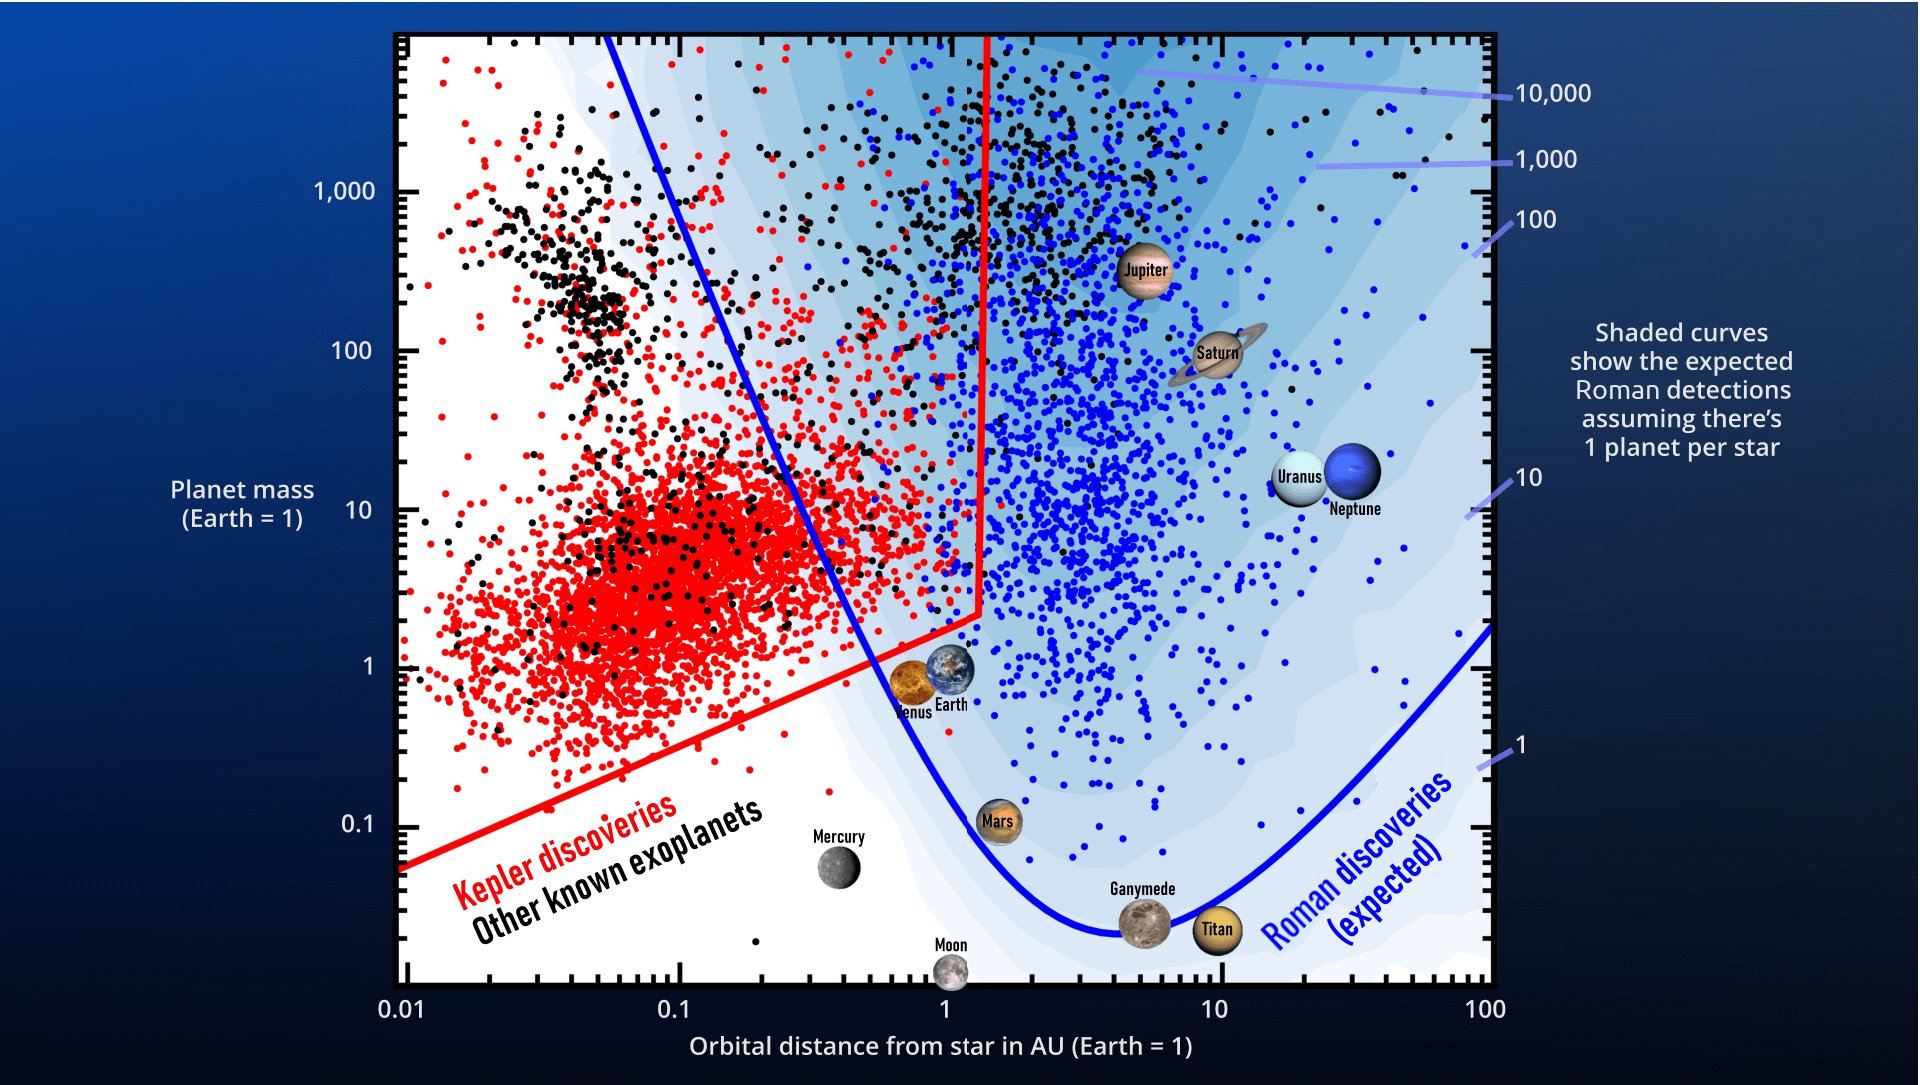 Kepler and other exoplanet search efforts have discovered thousands of large planets with small orbits, represented by the red and black dots on this chart